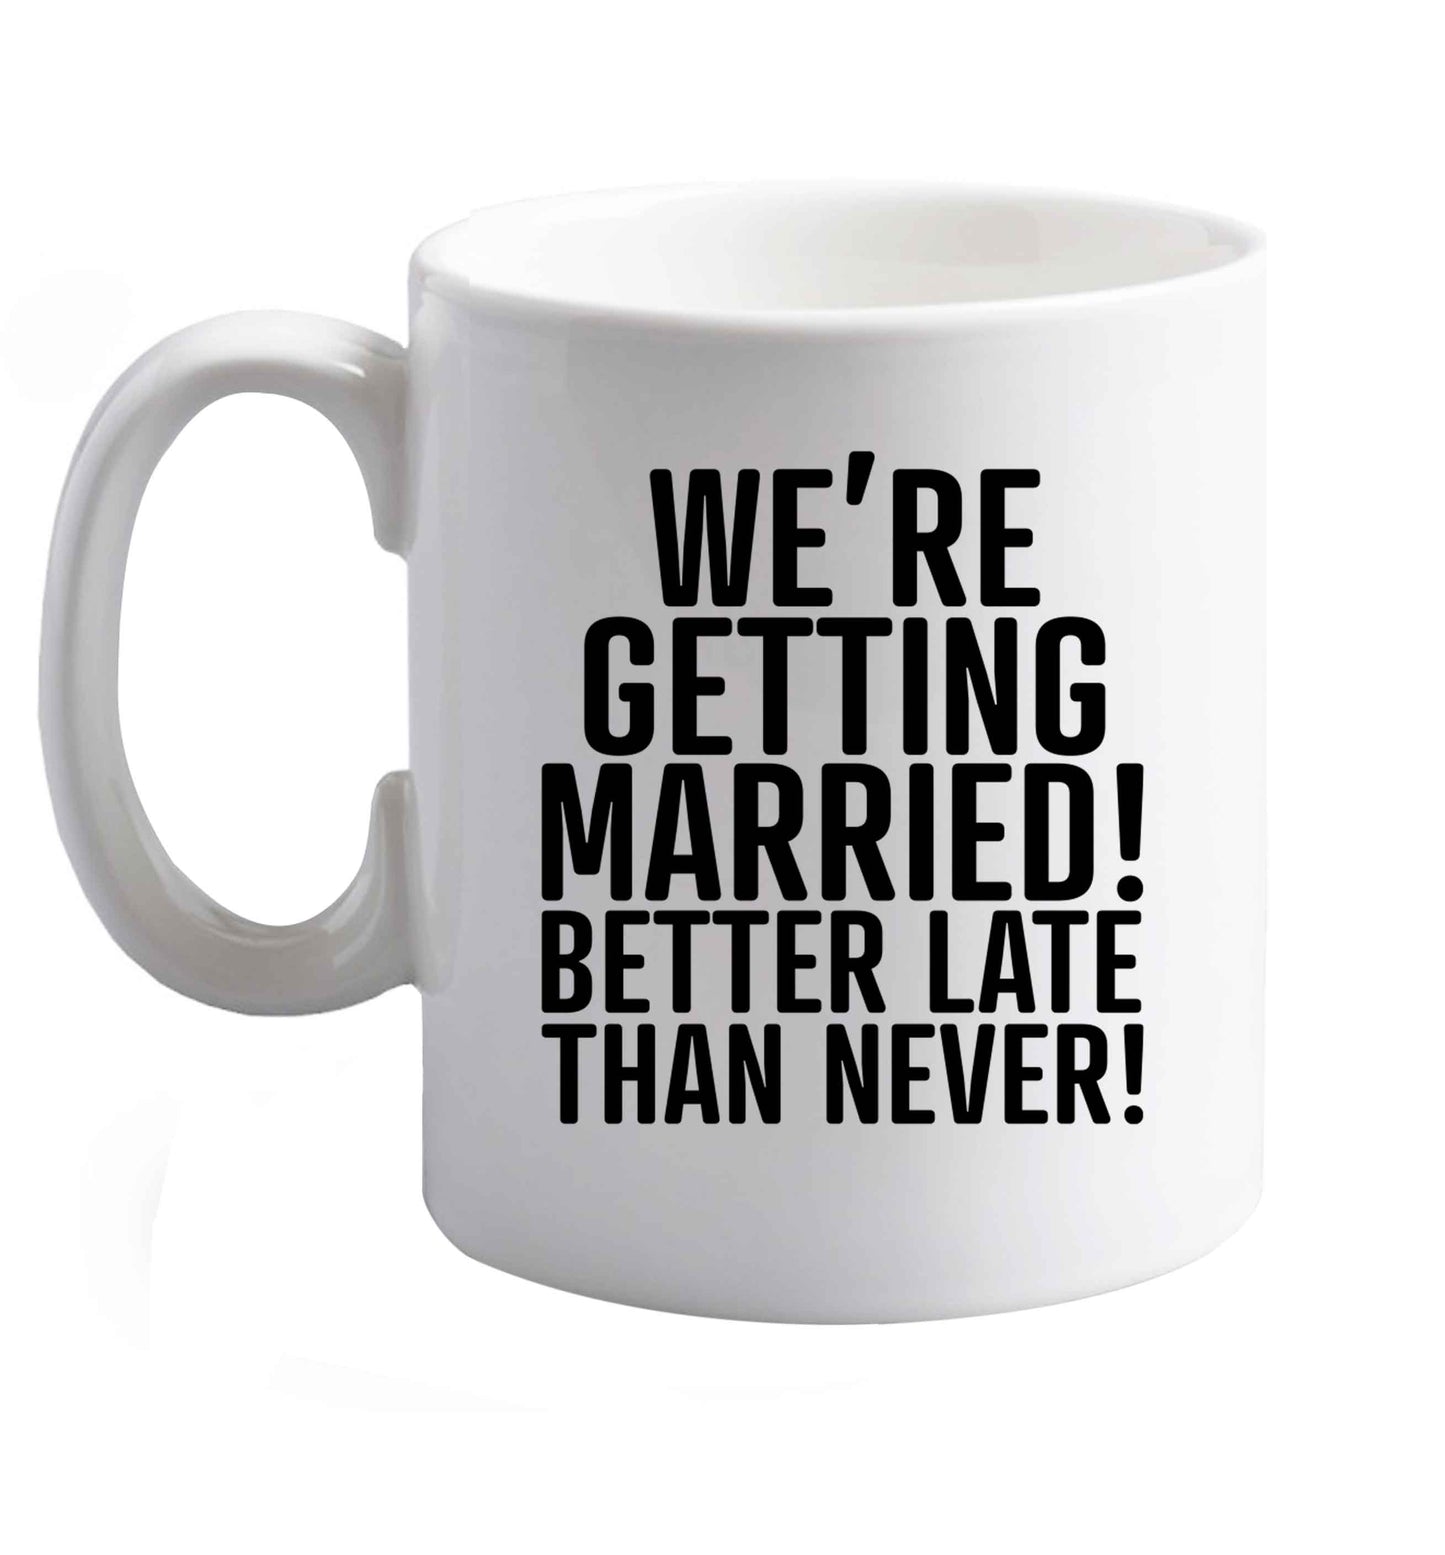 10 oz Always the bridesmaid but never the bride? Until now!   ceramic mug right handed